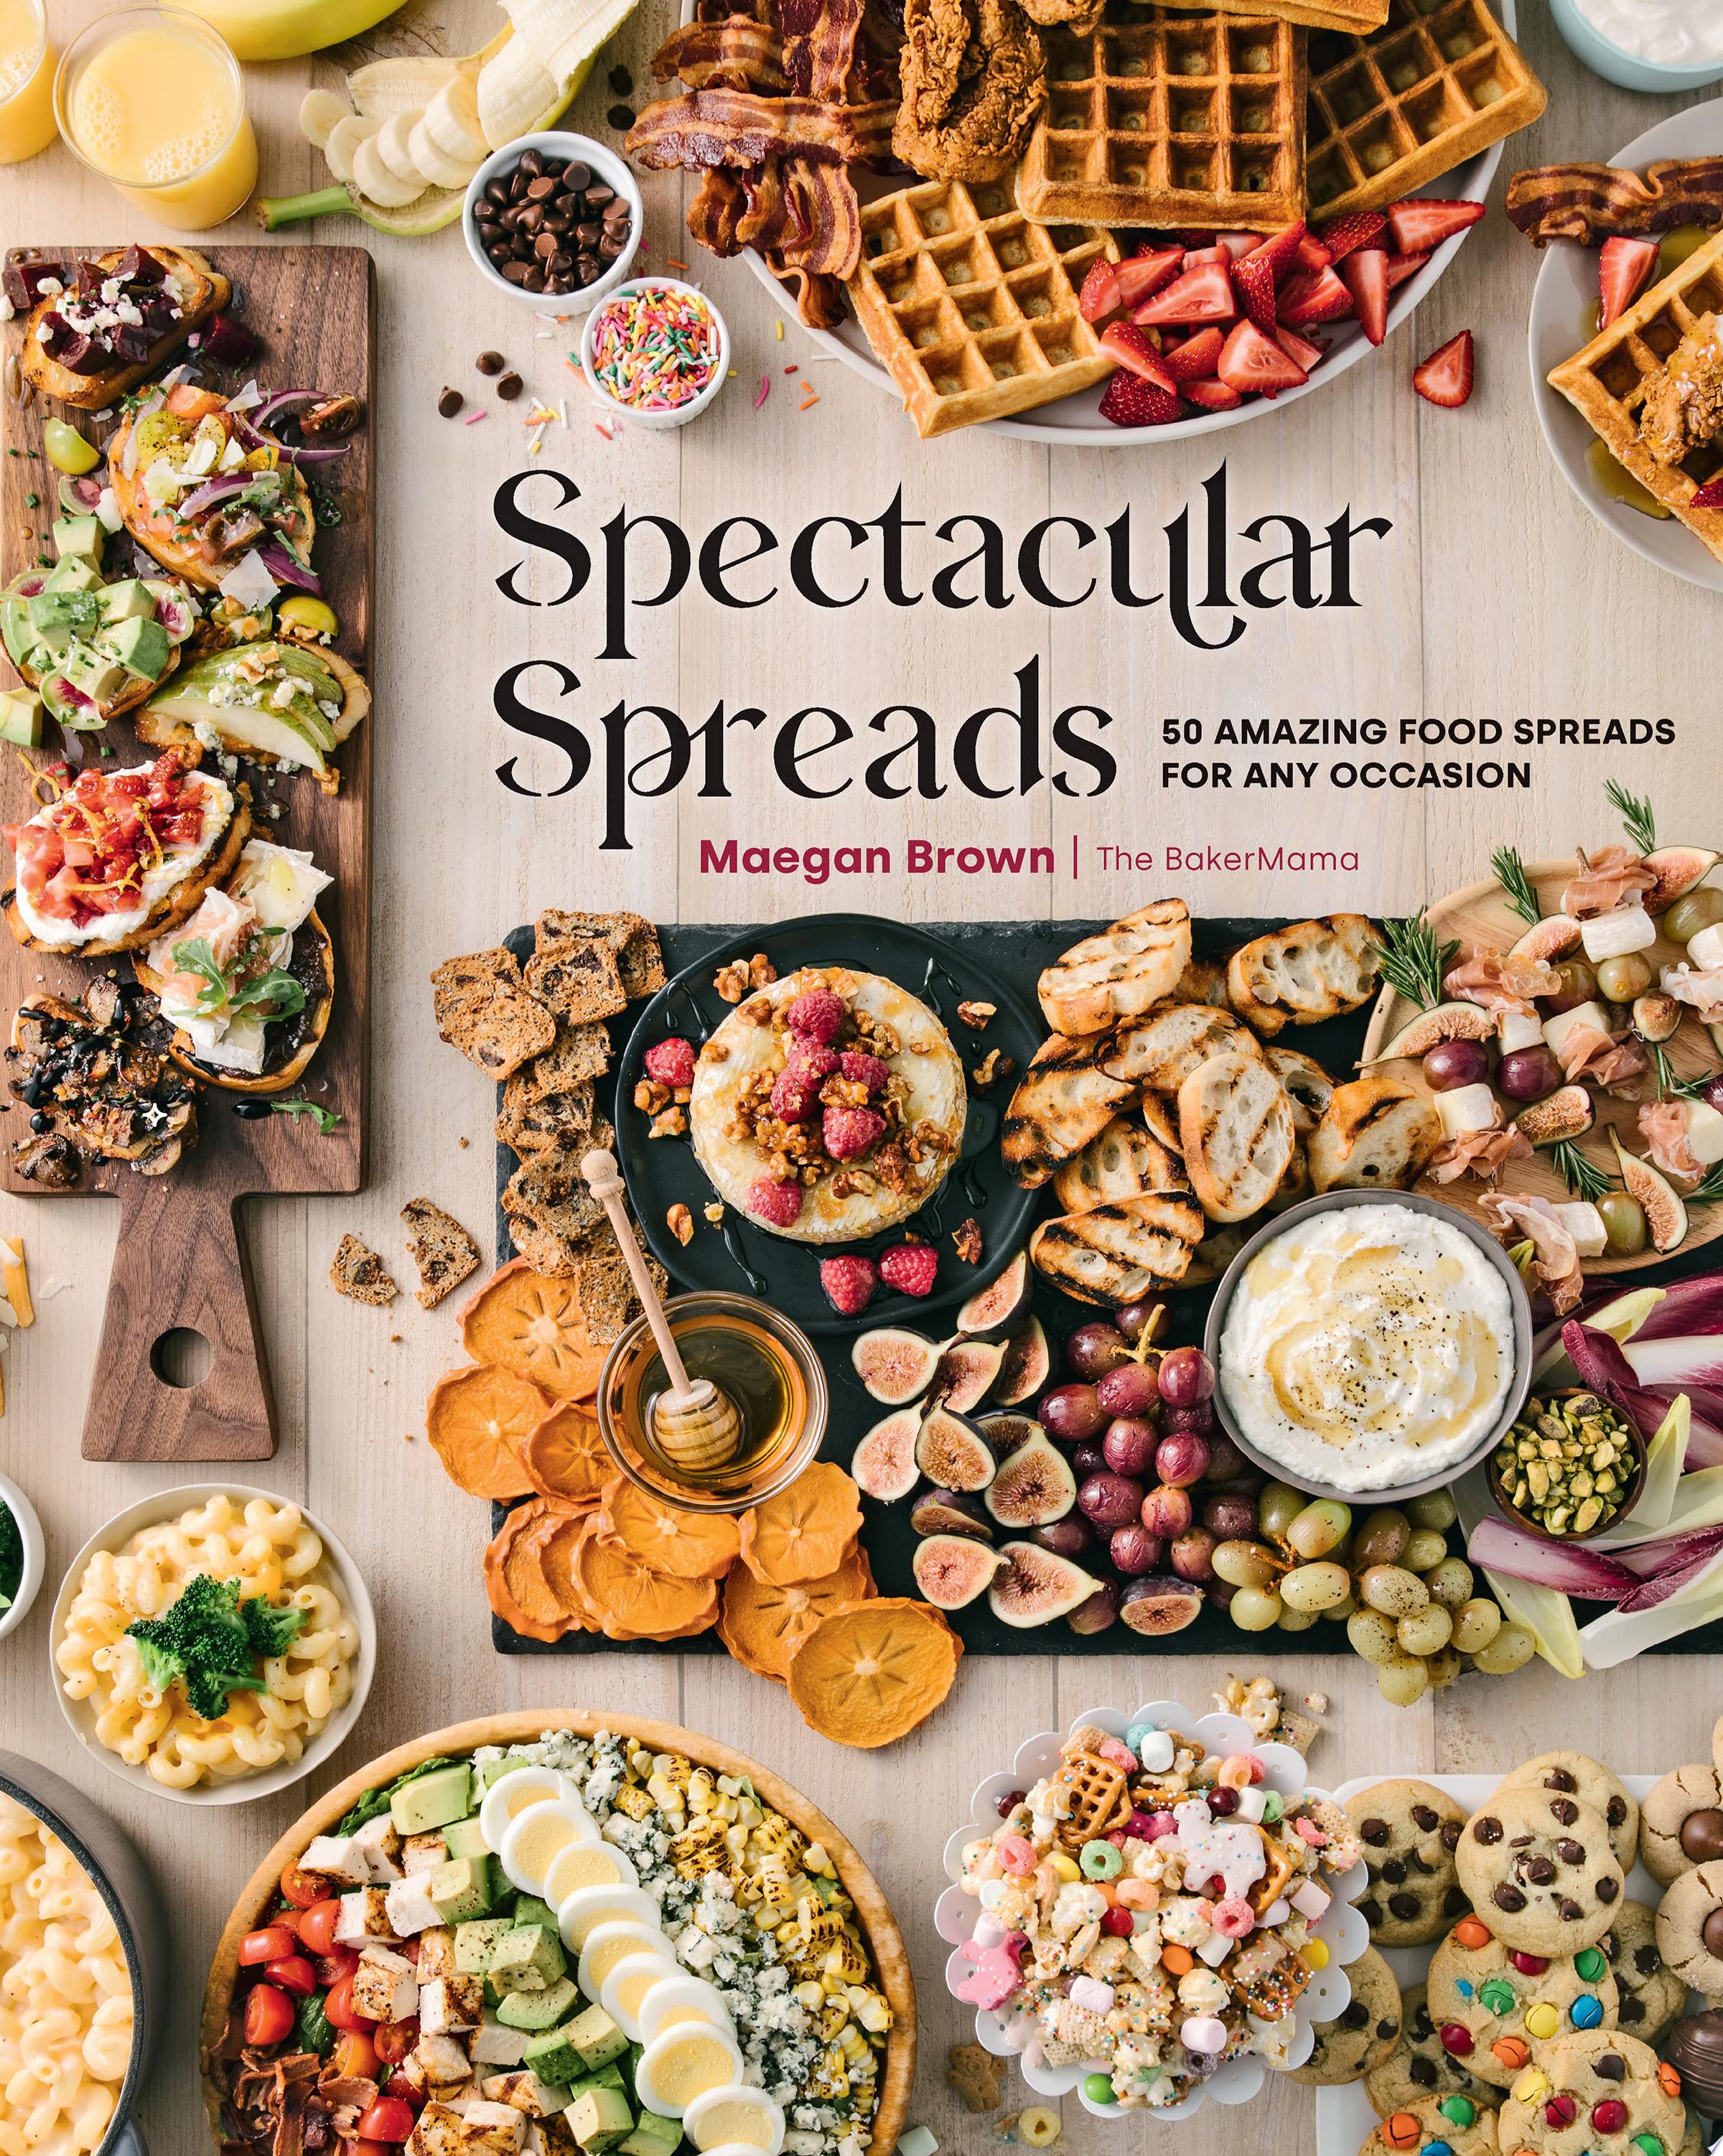 Image for "Spectacular Spreads"